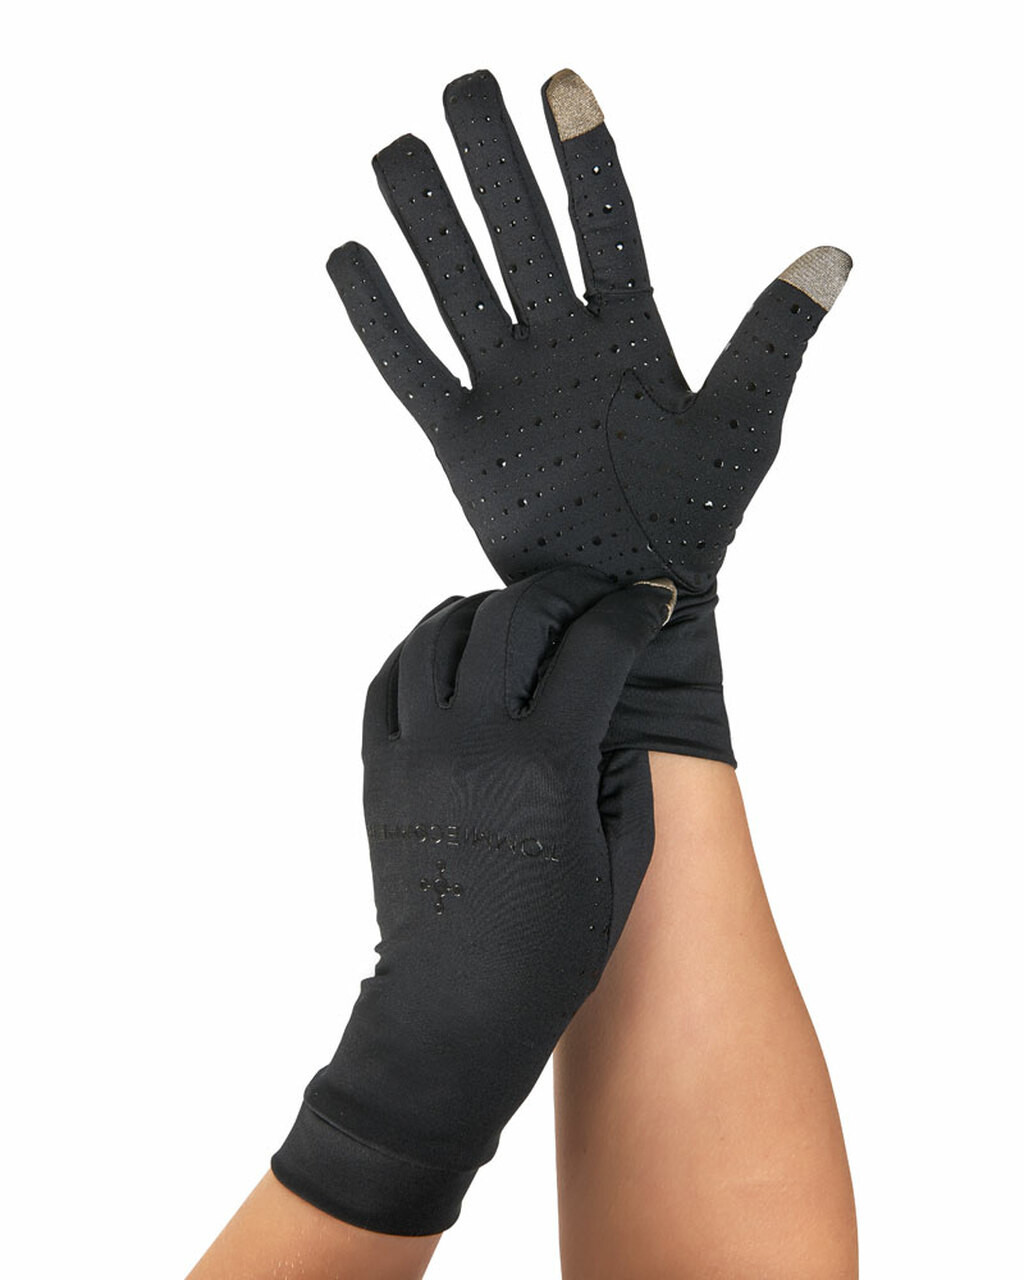 https://cdn11.bigcommerce.com/s-62tlfv23od/images/stencil/1280x1280/products/157/4200/womens-core-compression-full-finger-gloves__85516.1648569206.jpg?c=1